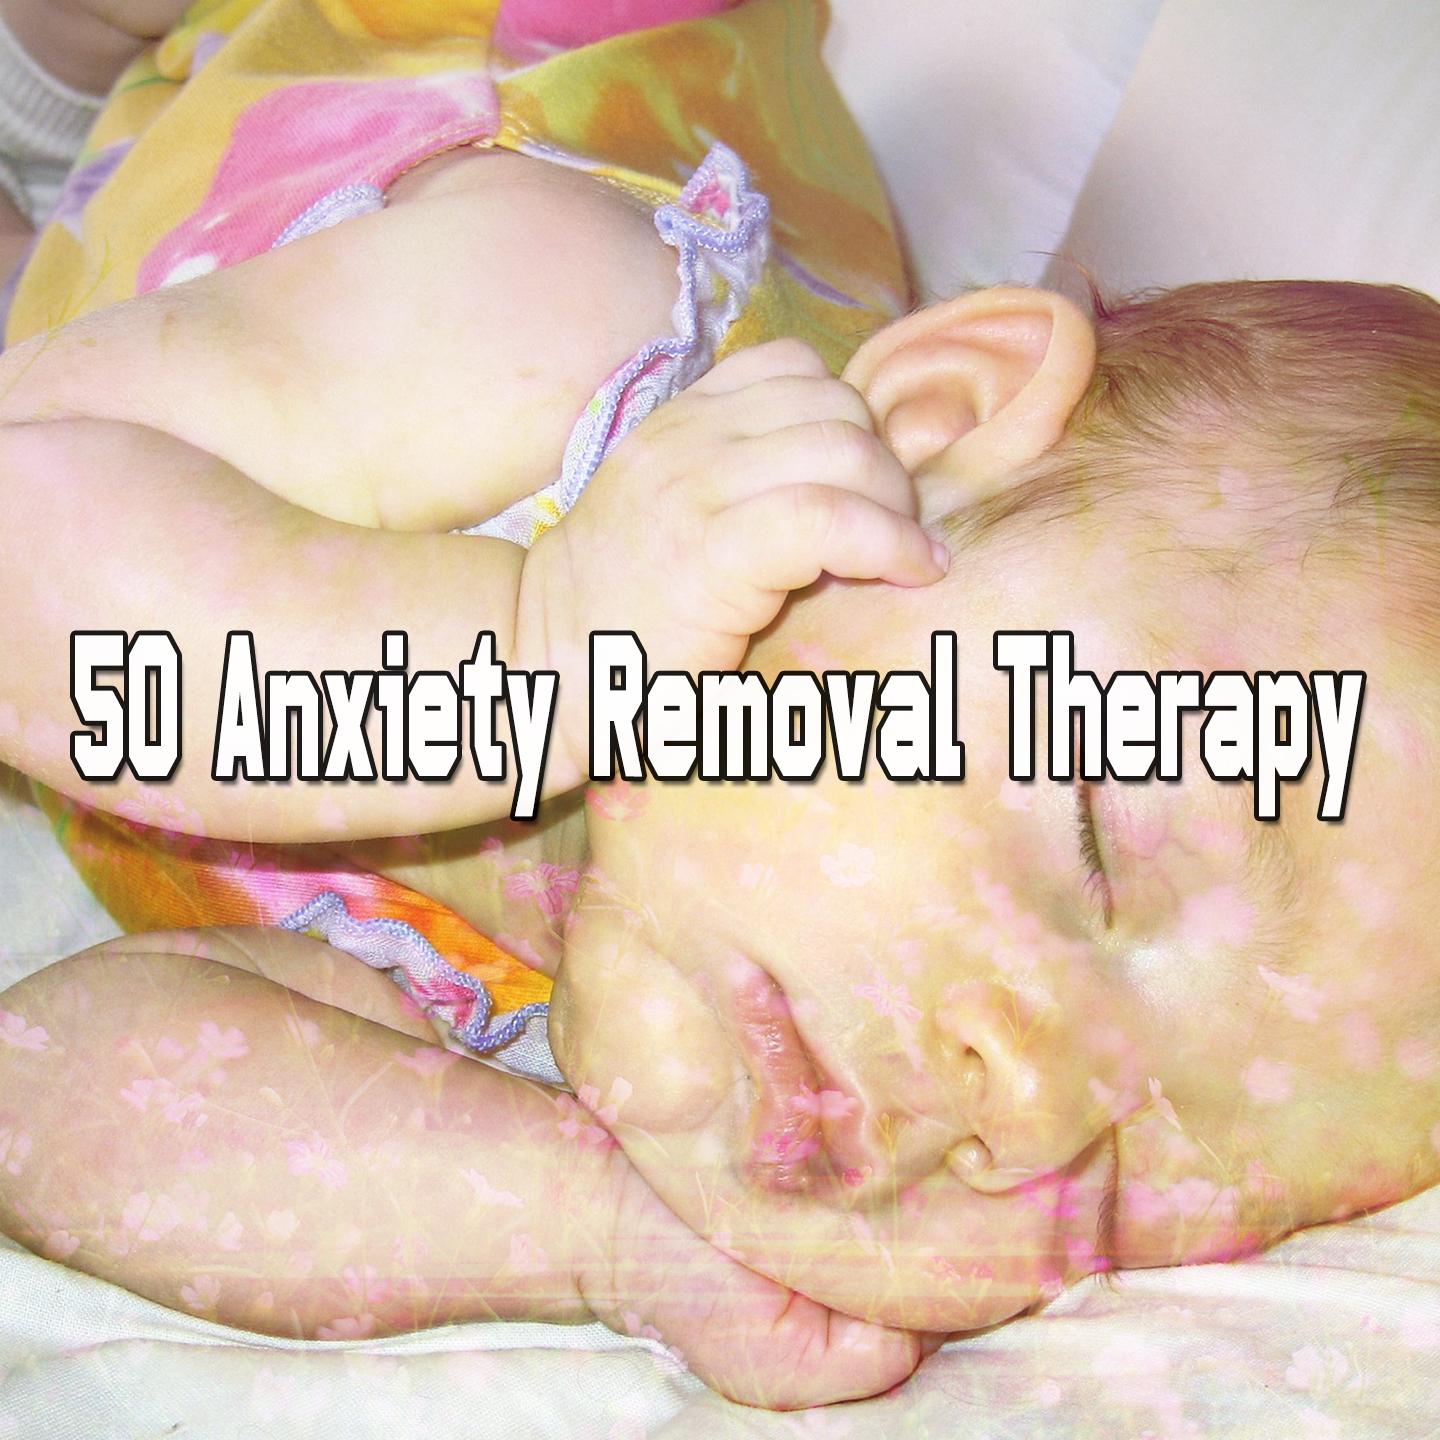 50 Anxiety Removal Therapy